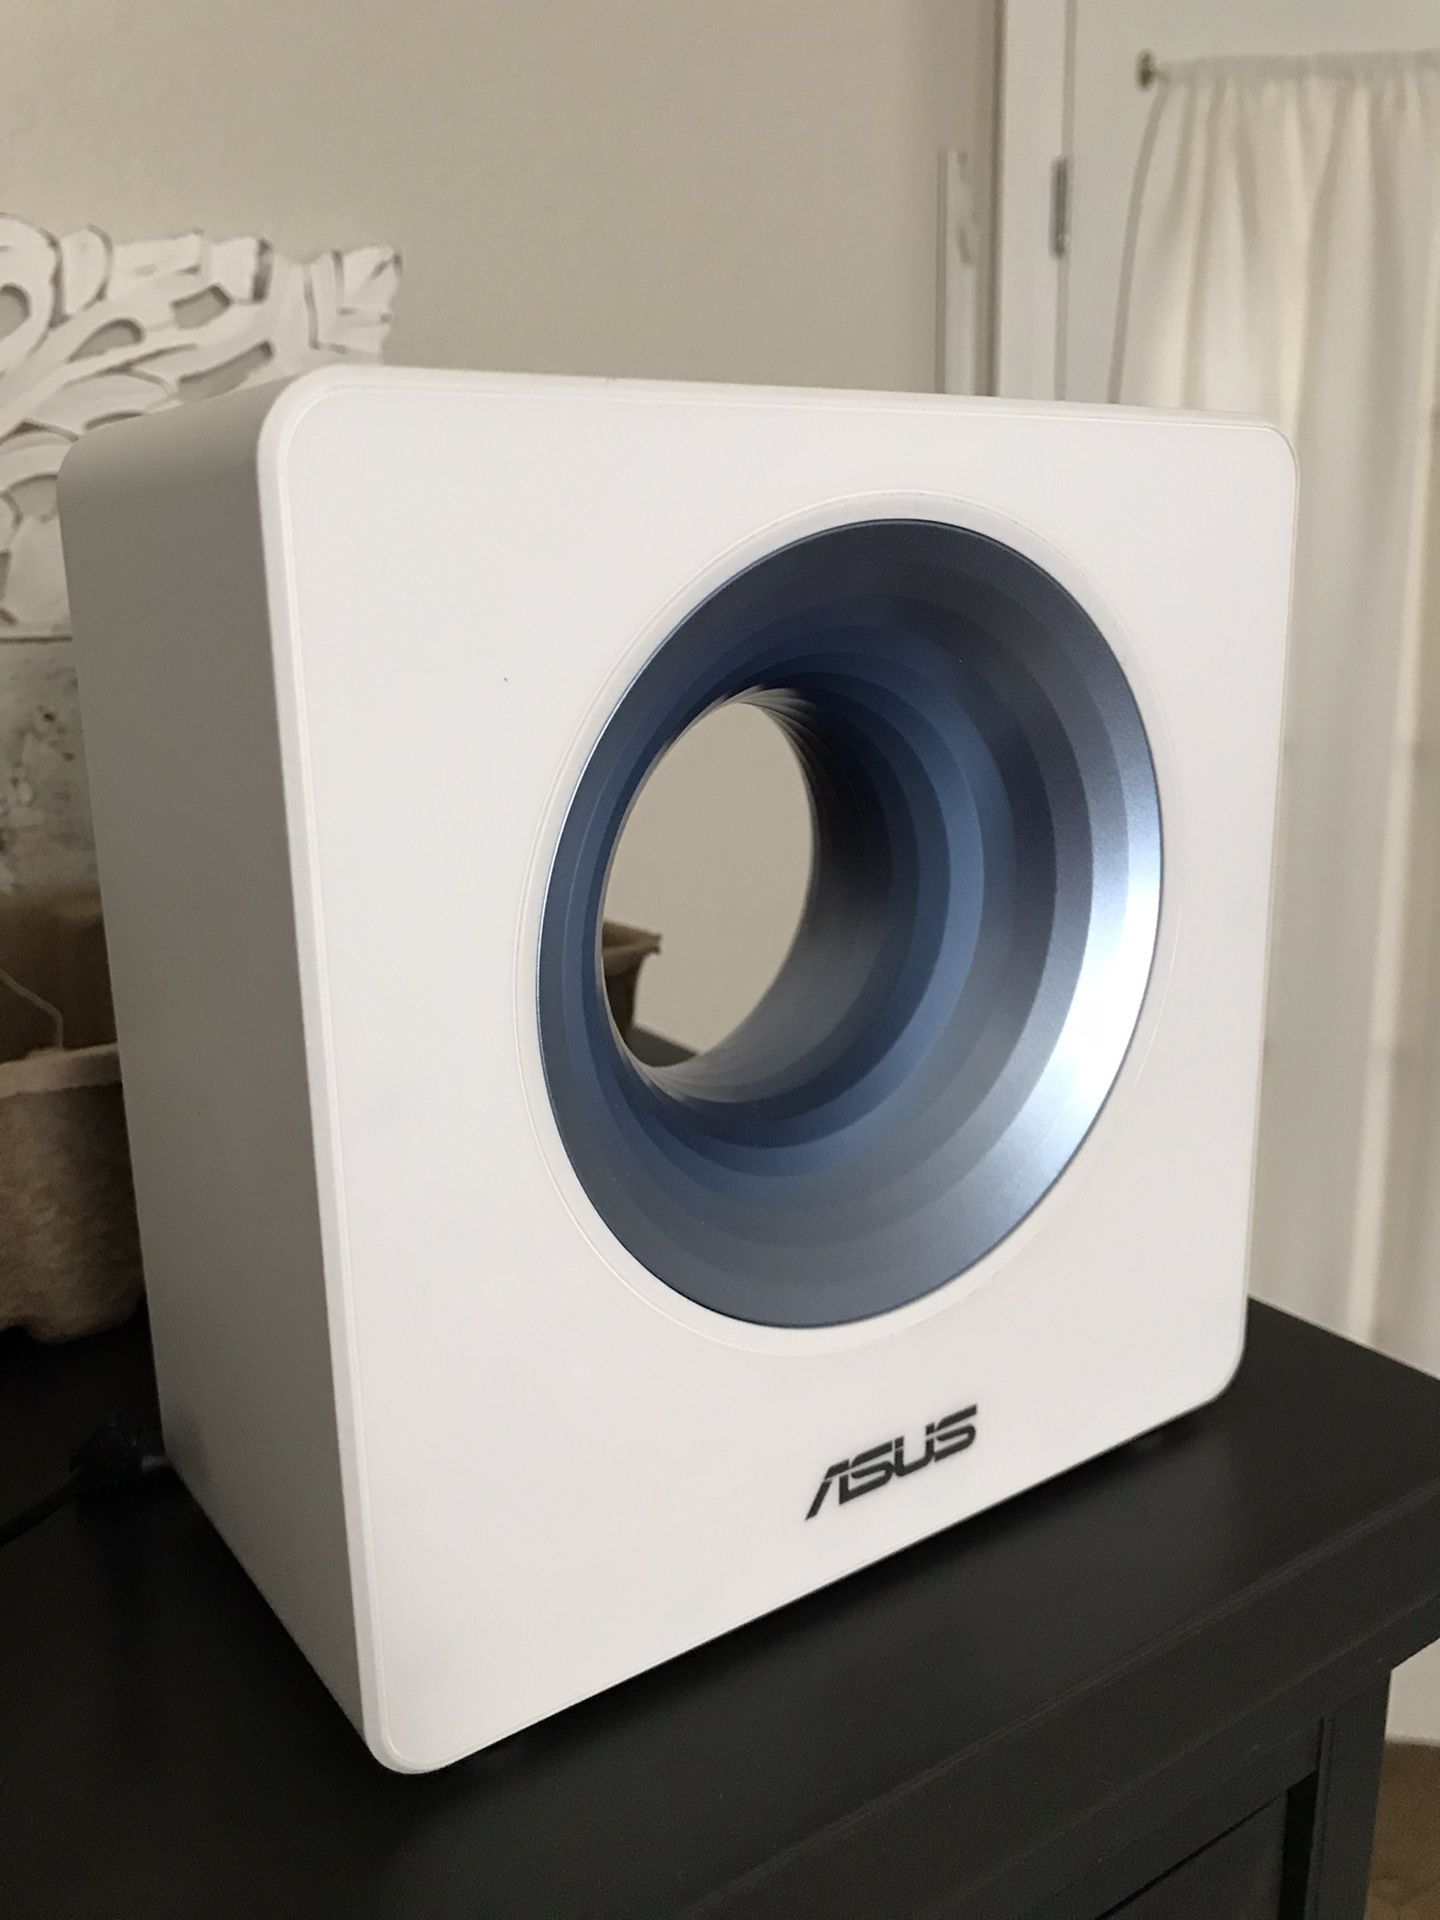 ASUS Blue Cave Wireless Router